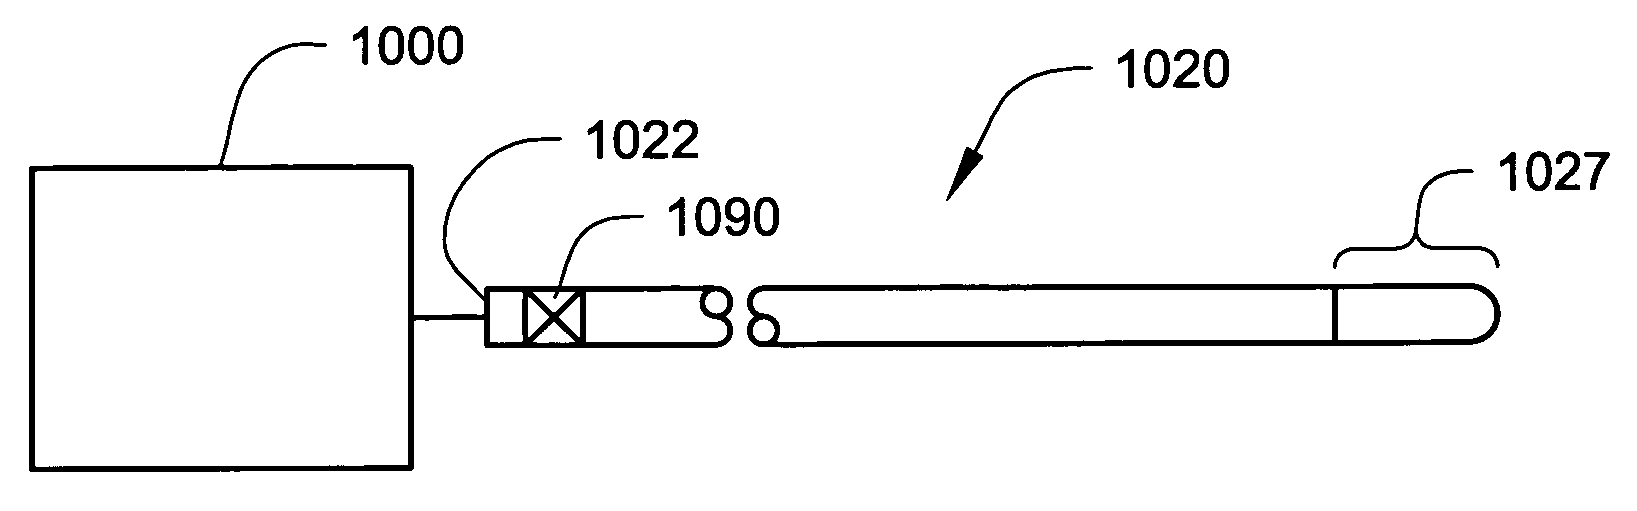 Catheters incorporating valves and permeable membranes